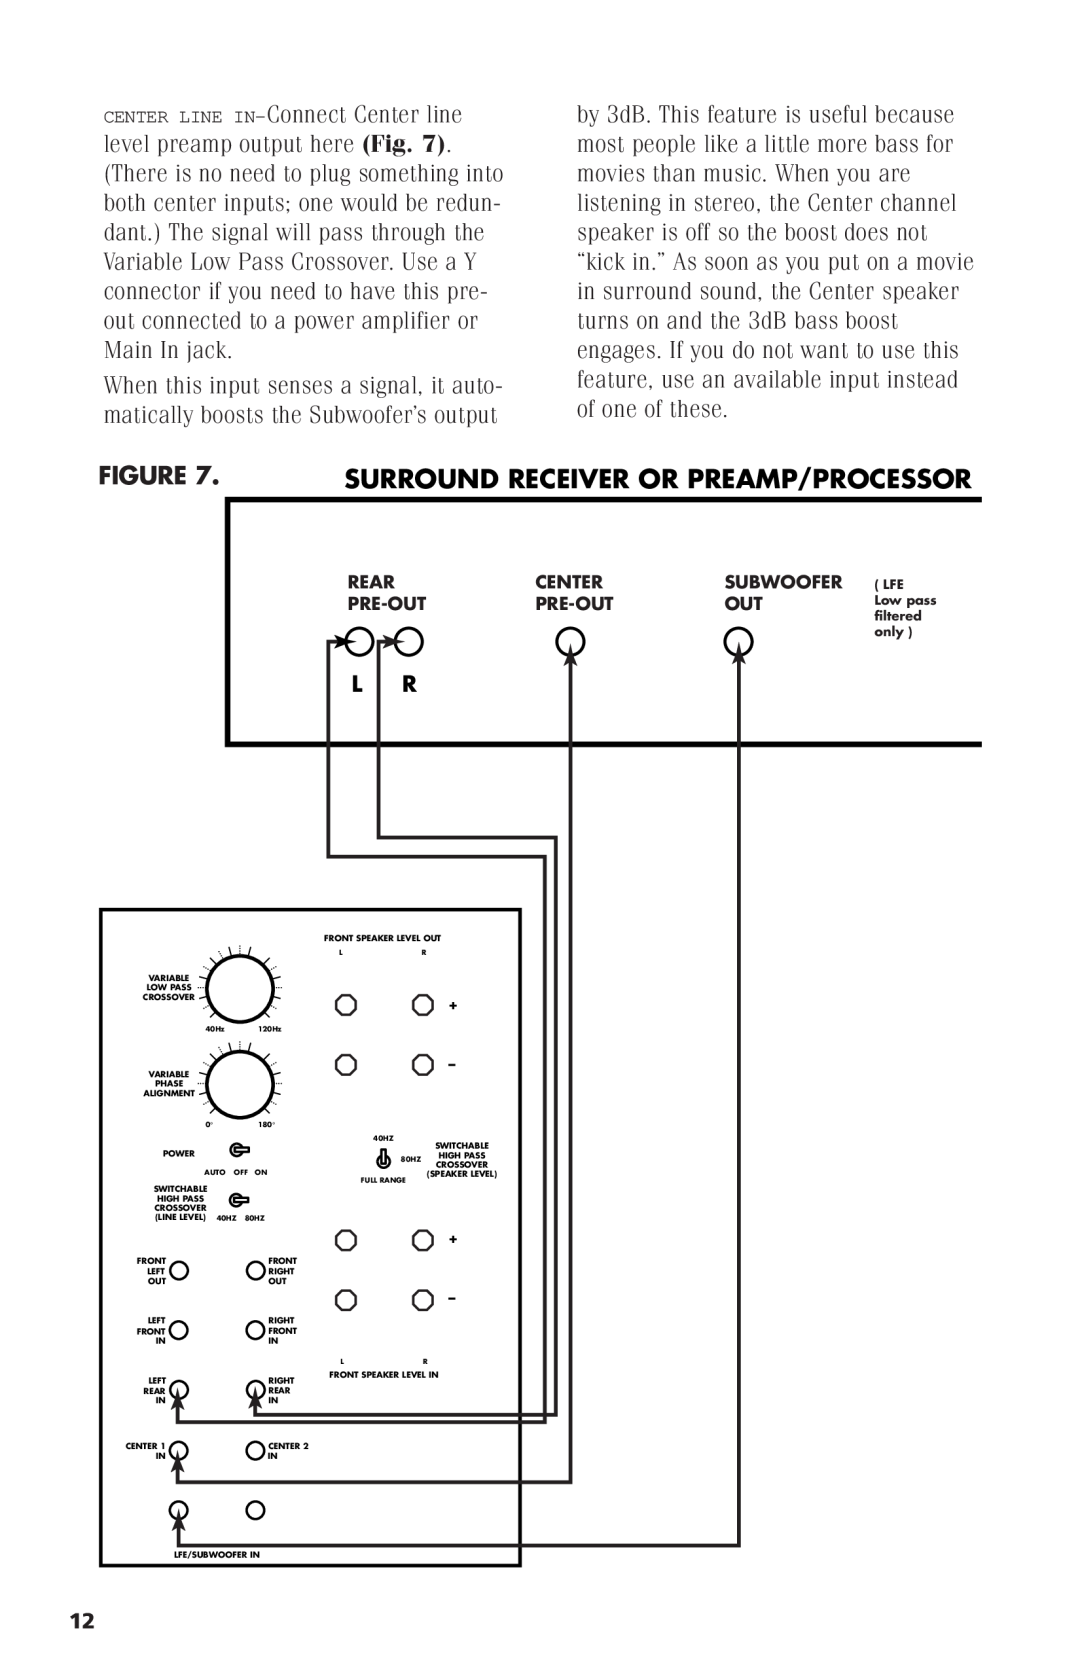 Polk Audio PSW1200 instruction manual Surround Receiver Or Preamp/Processor 